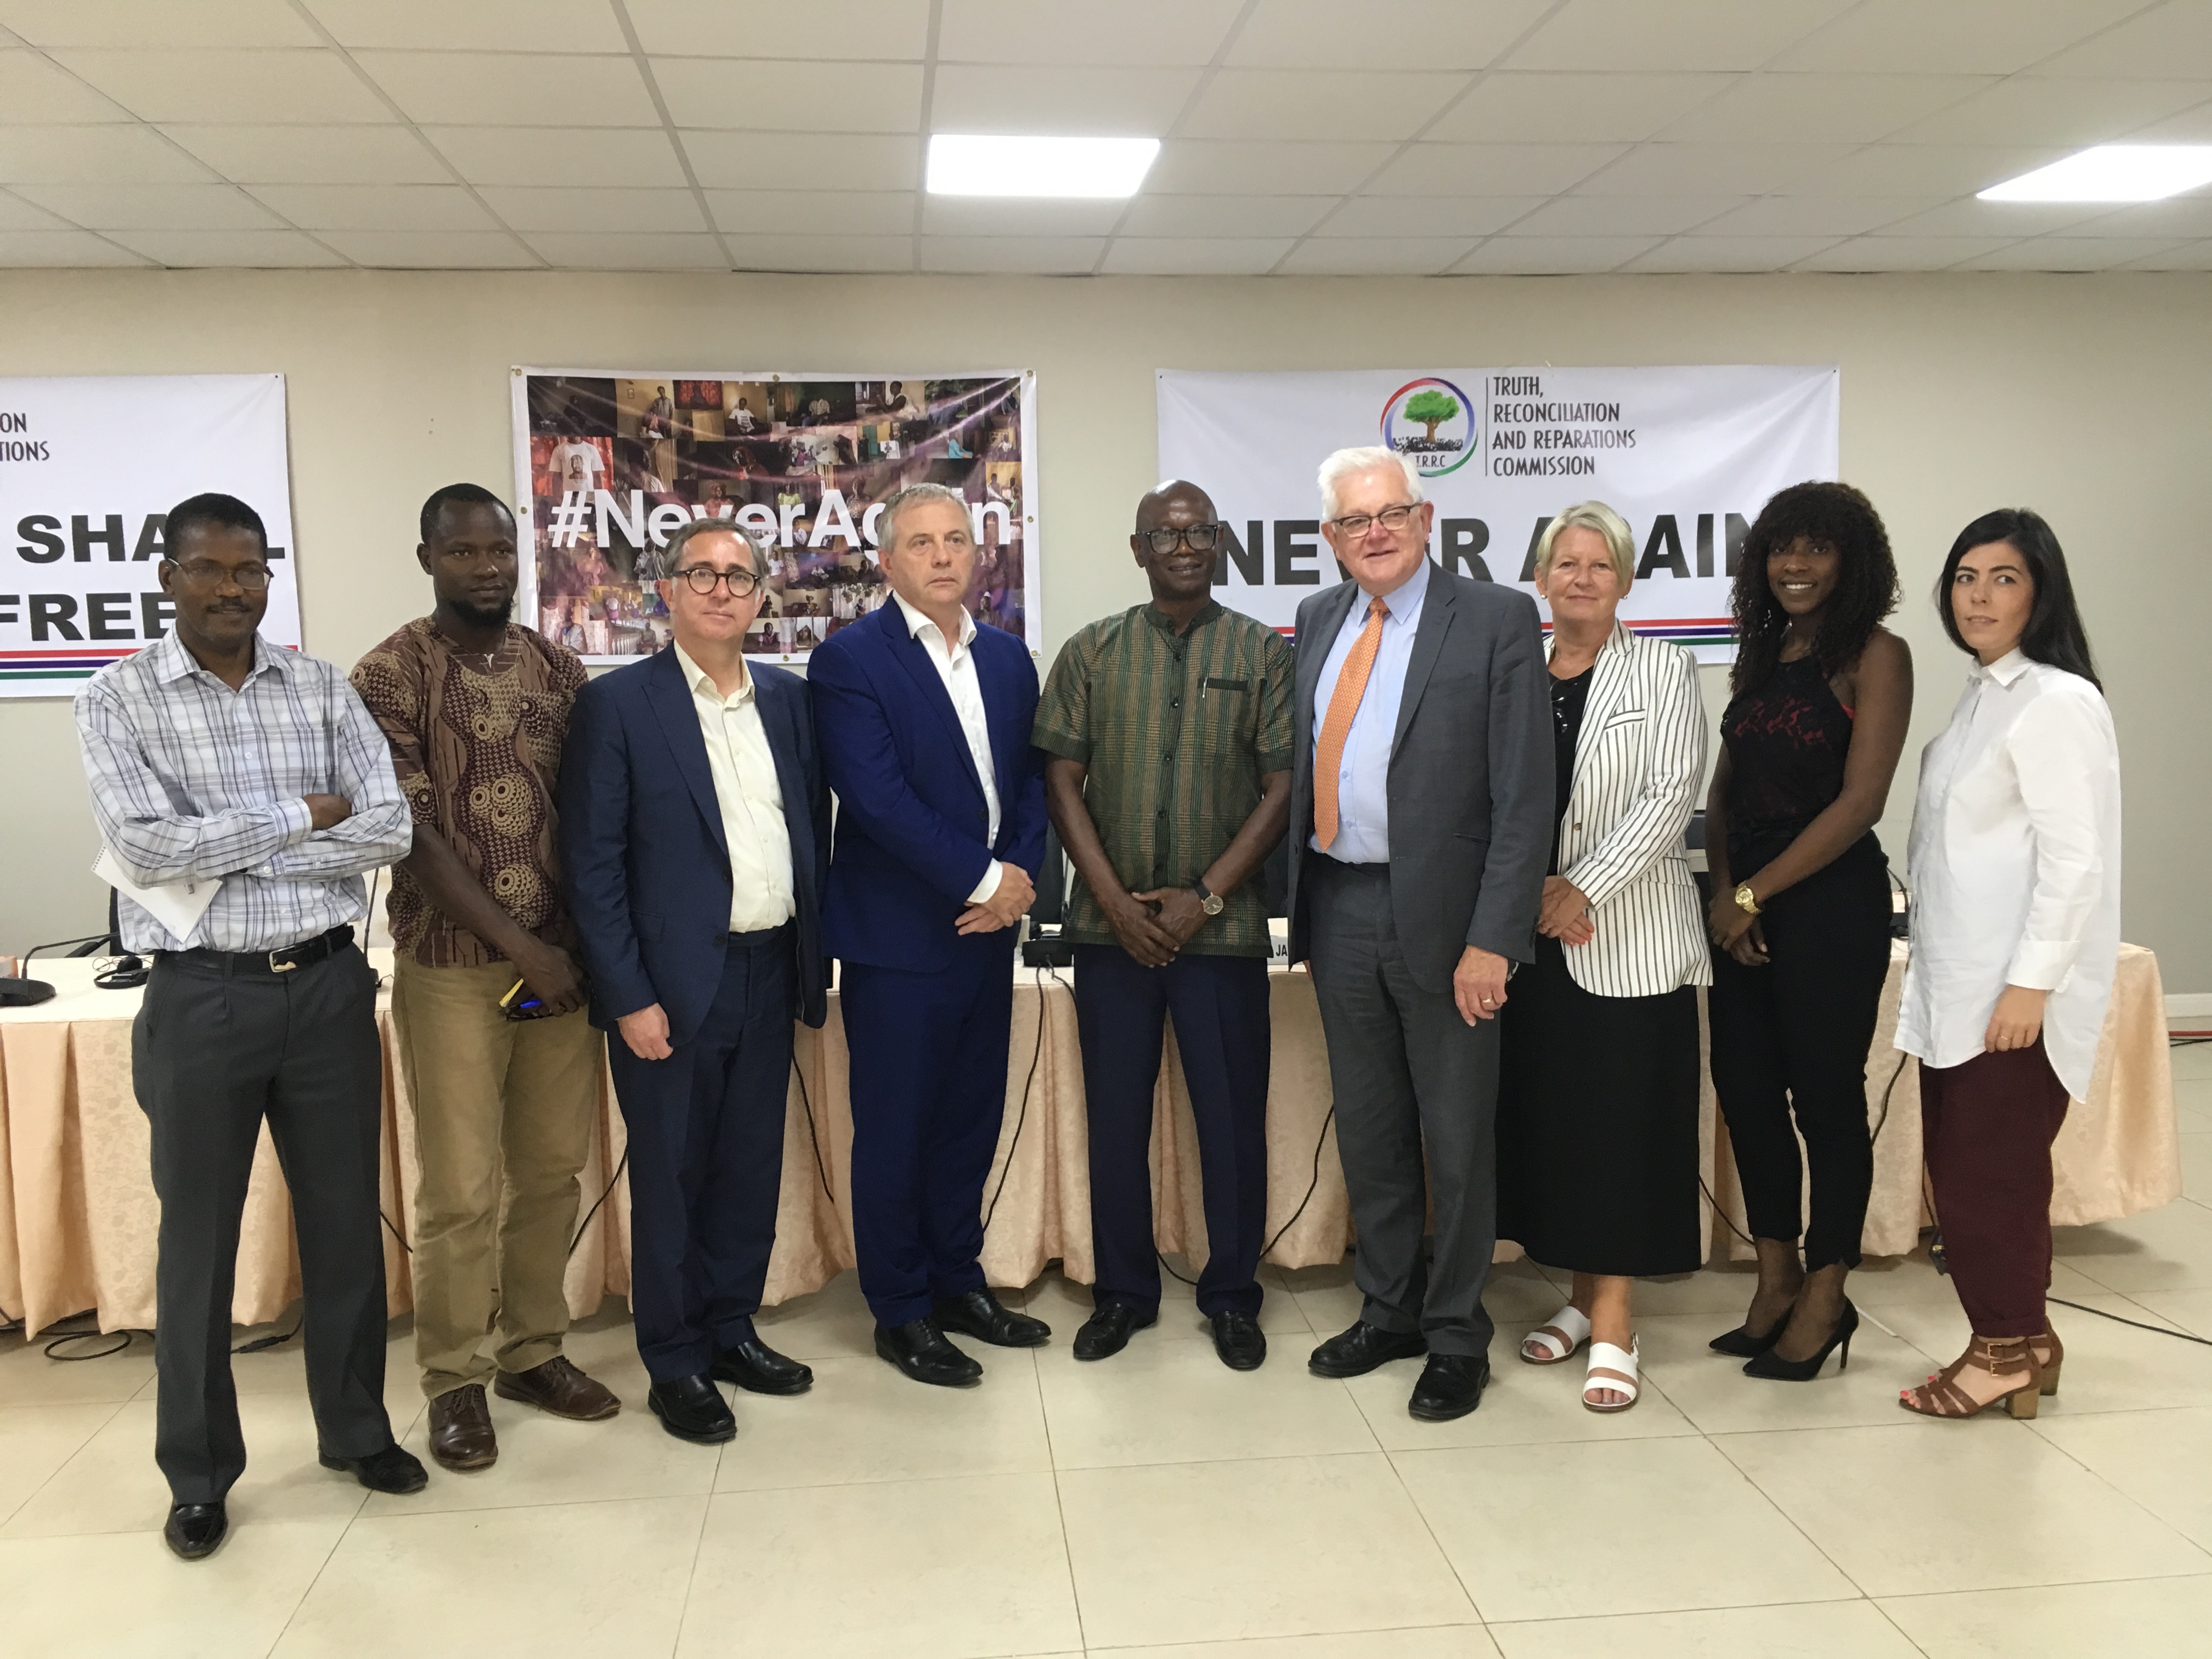 The delegation learned about the work of the Truth, Reconciliation and Reparations Commission